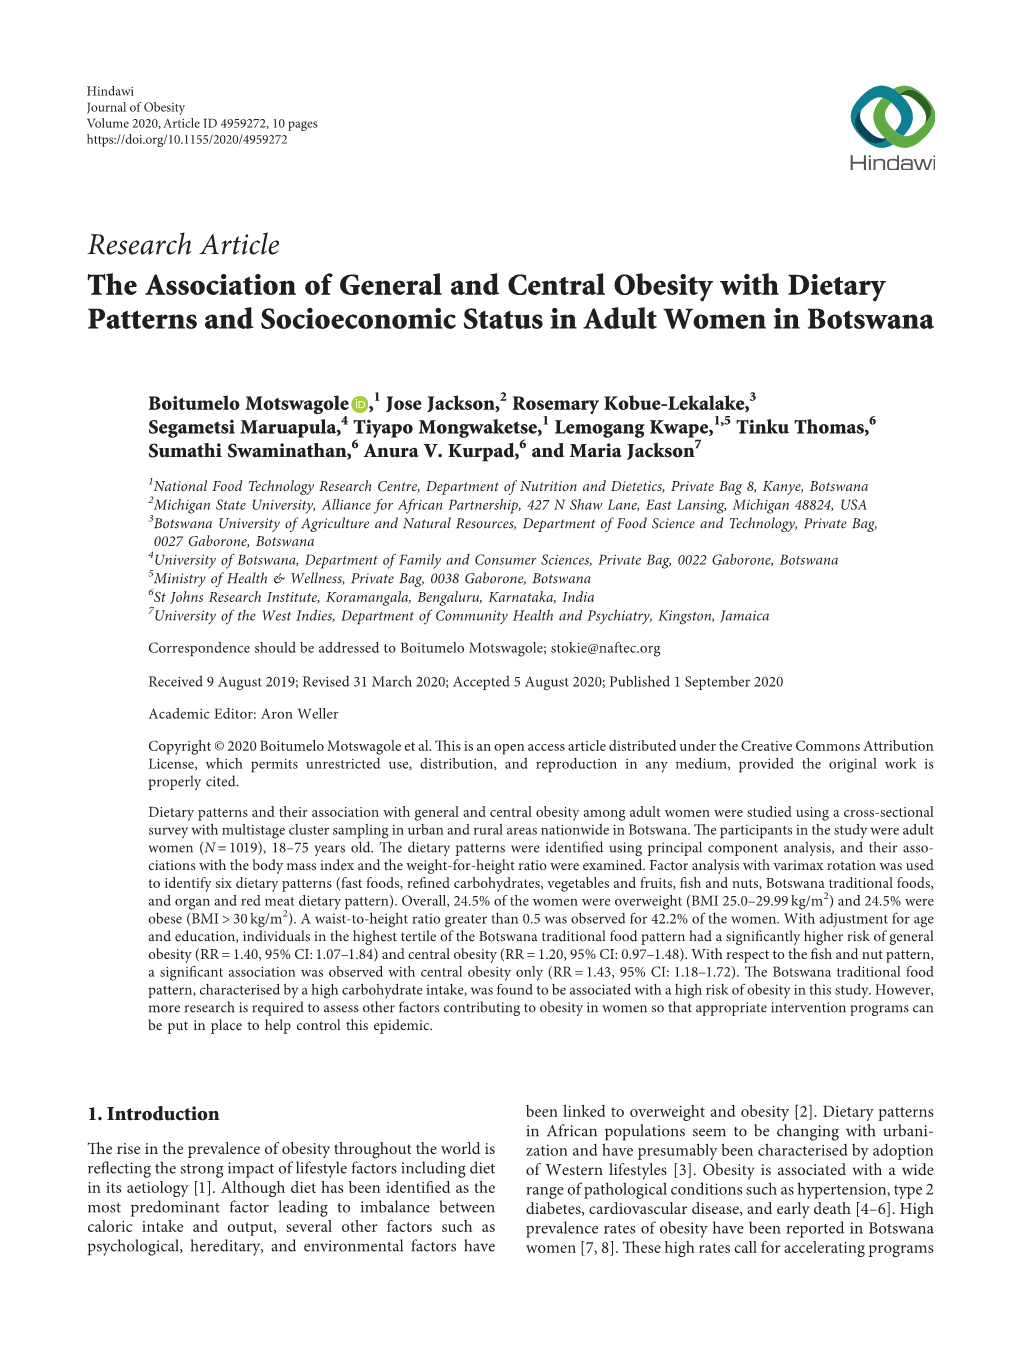 The Association of General and Central Obesity with Dietary Patterns and Socioeconomic Status in Adult Women in Botswana